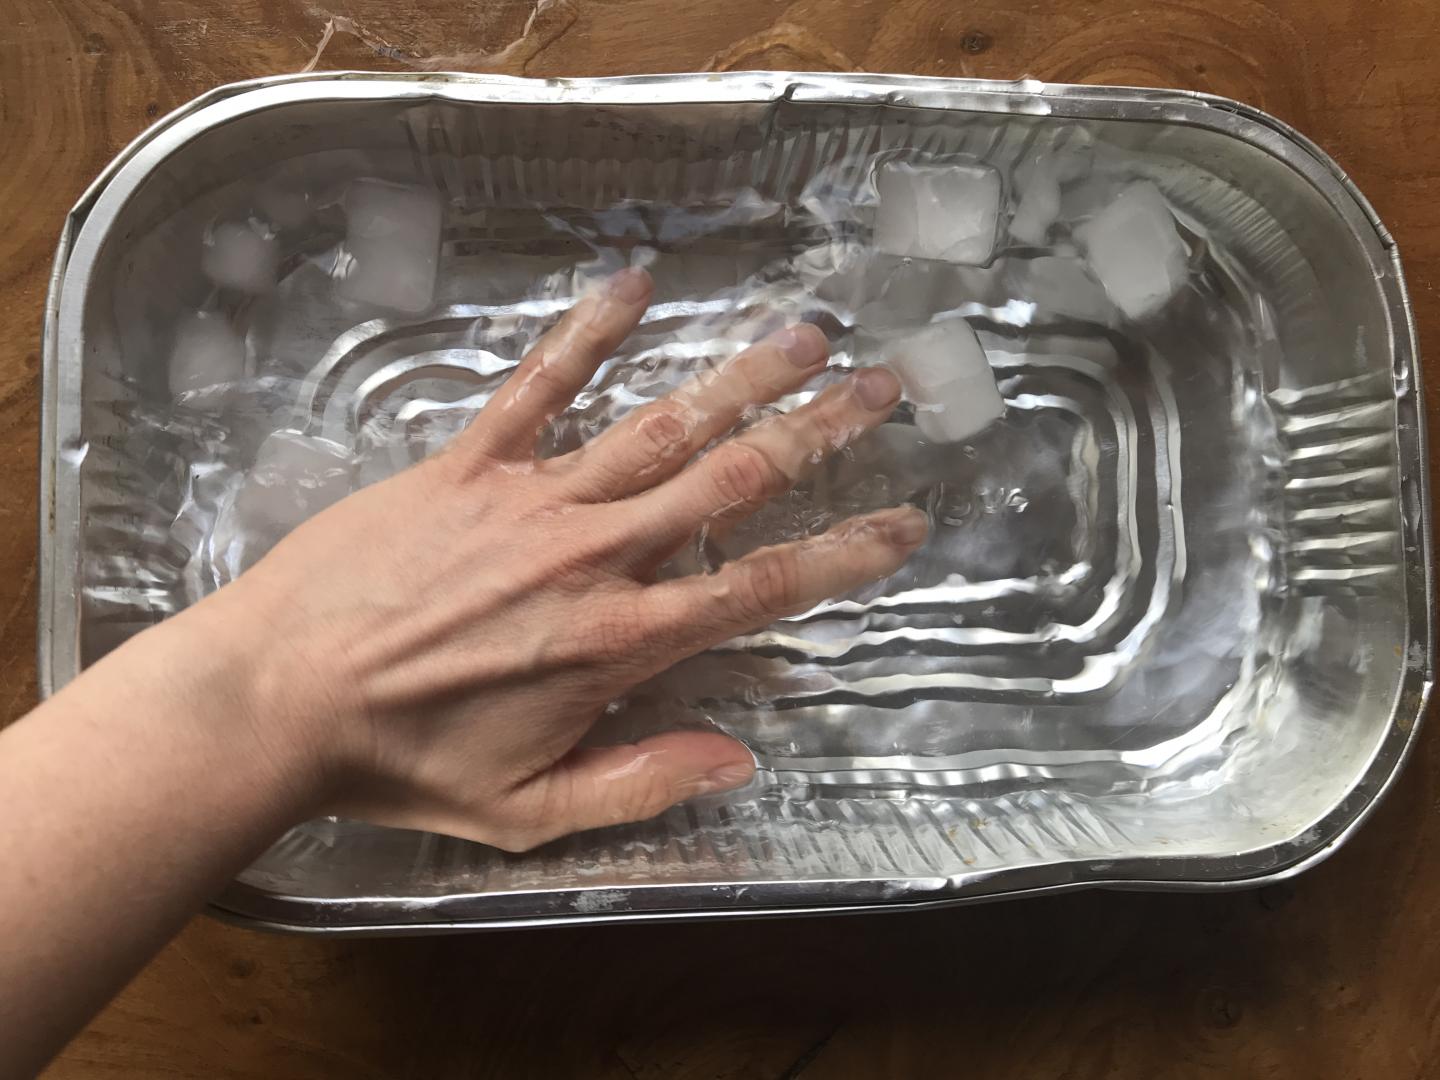 Water and ice cubes are in a shallow dish. Someone's hand in making waves.